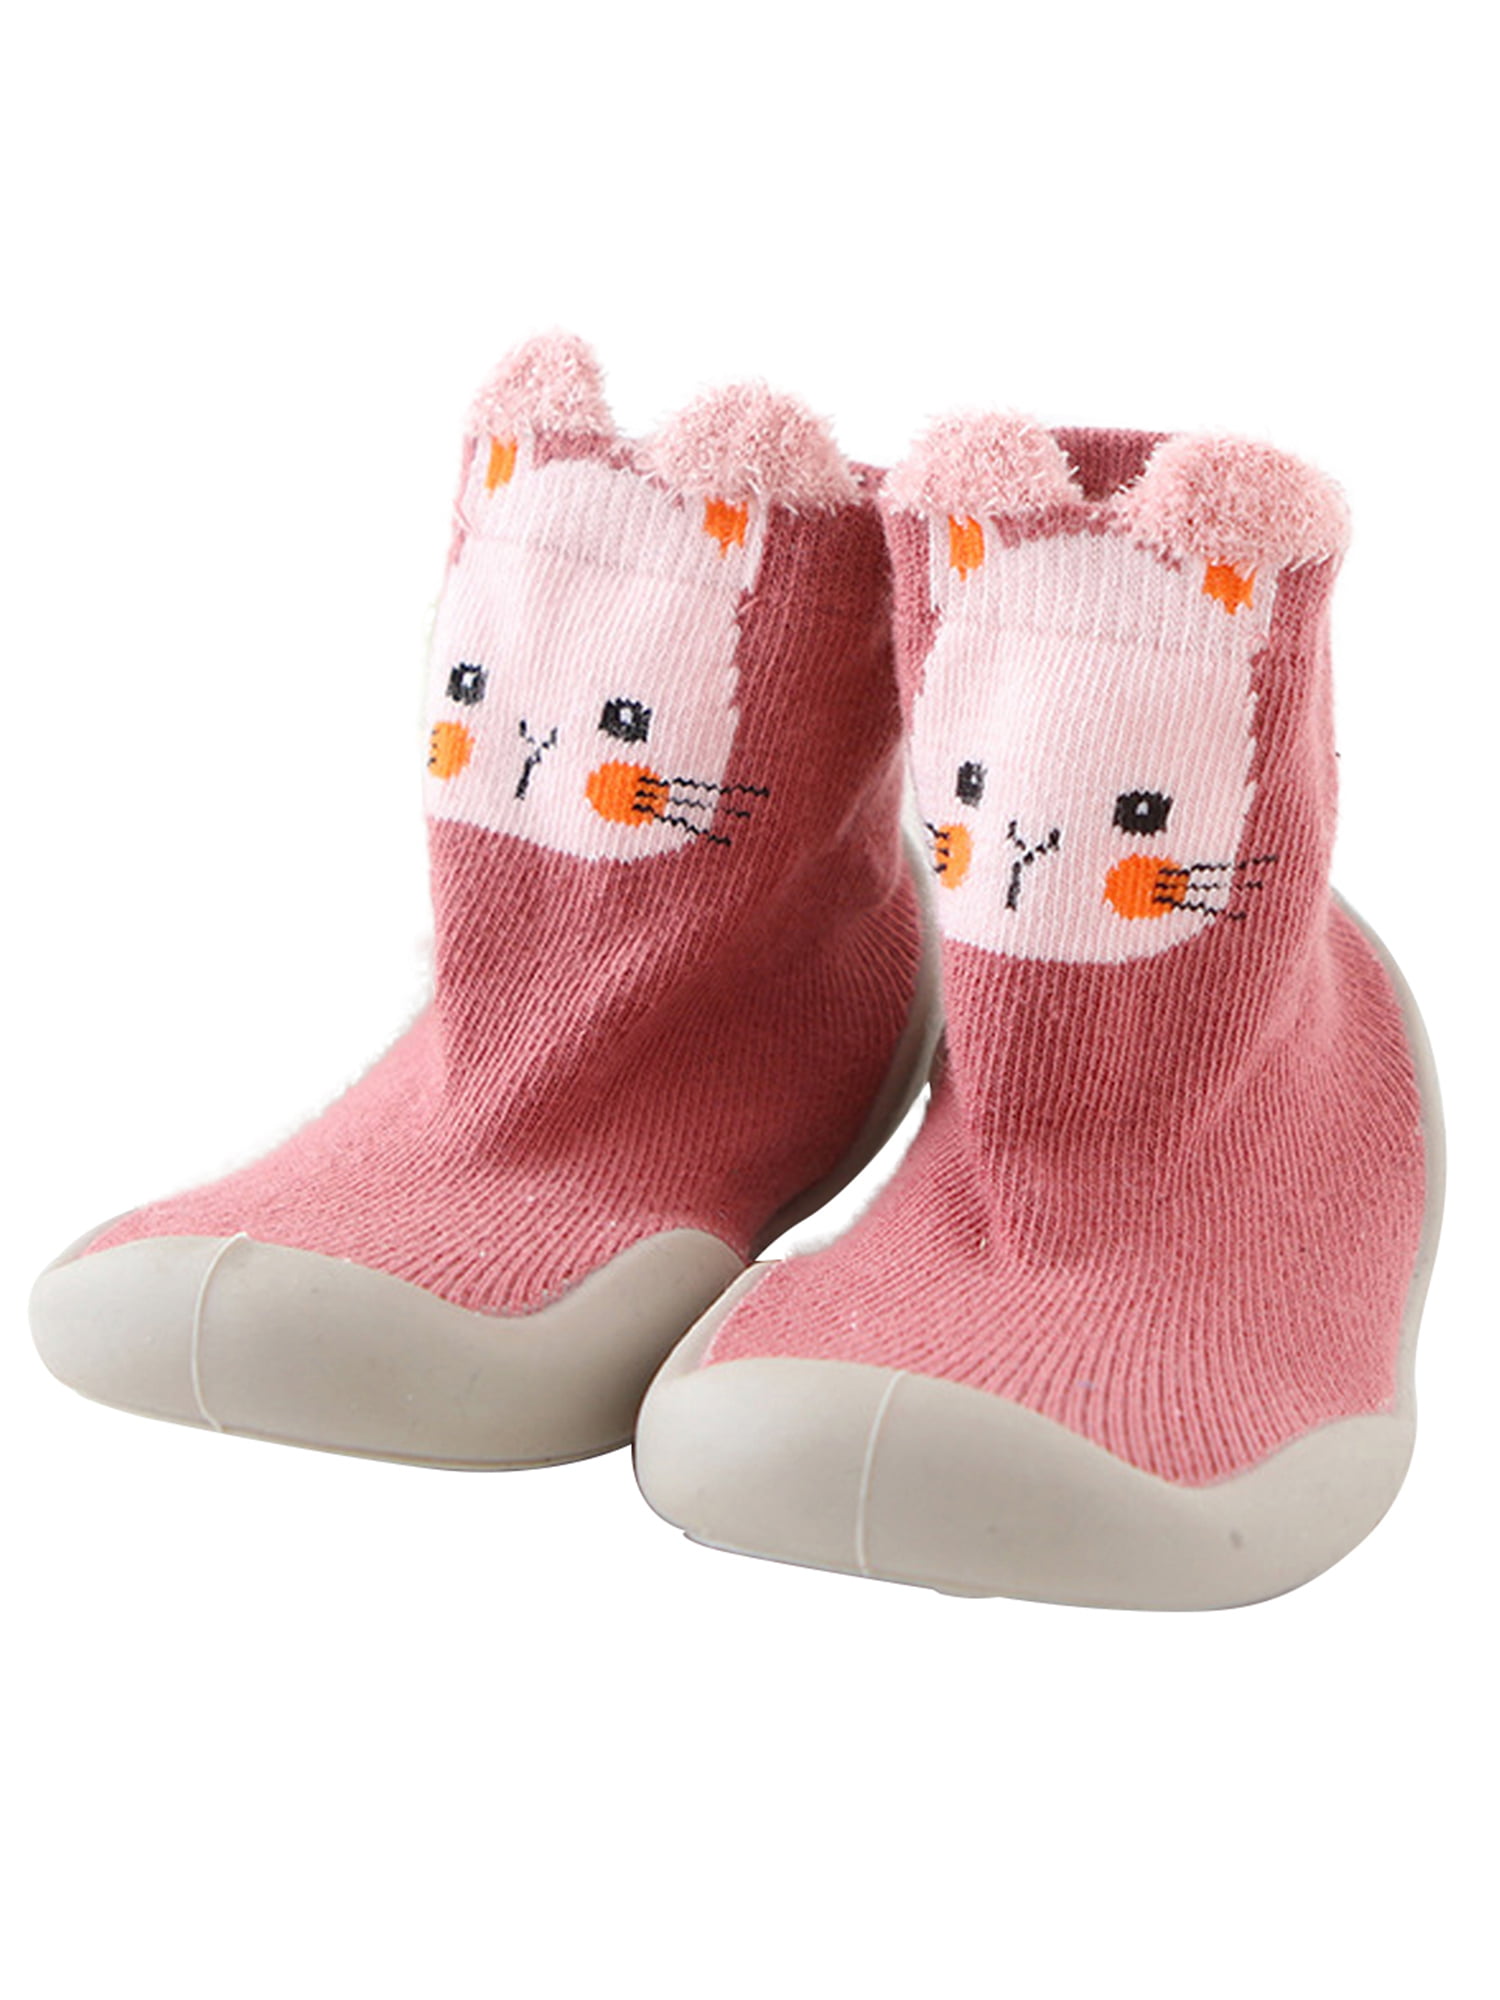 OutTop Toddler Slipper Socks for Boys Girls Cute Anime Baby Non-Skid Floor Slippers Soft Rubber Sole Indoor Sock Shoes 